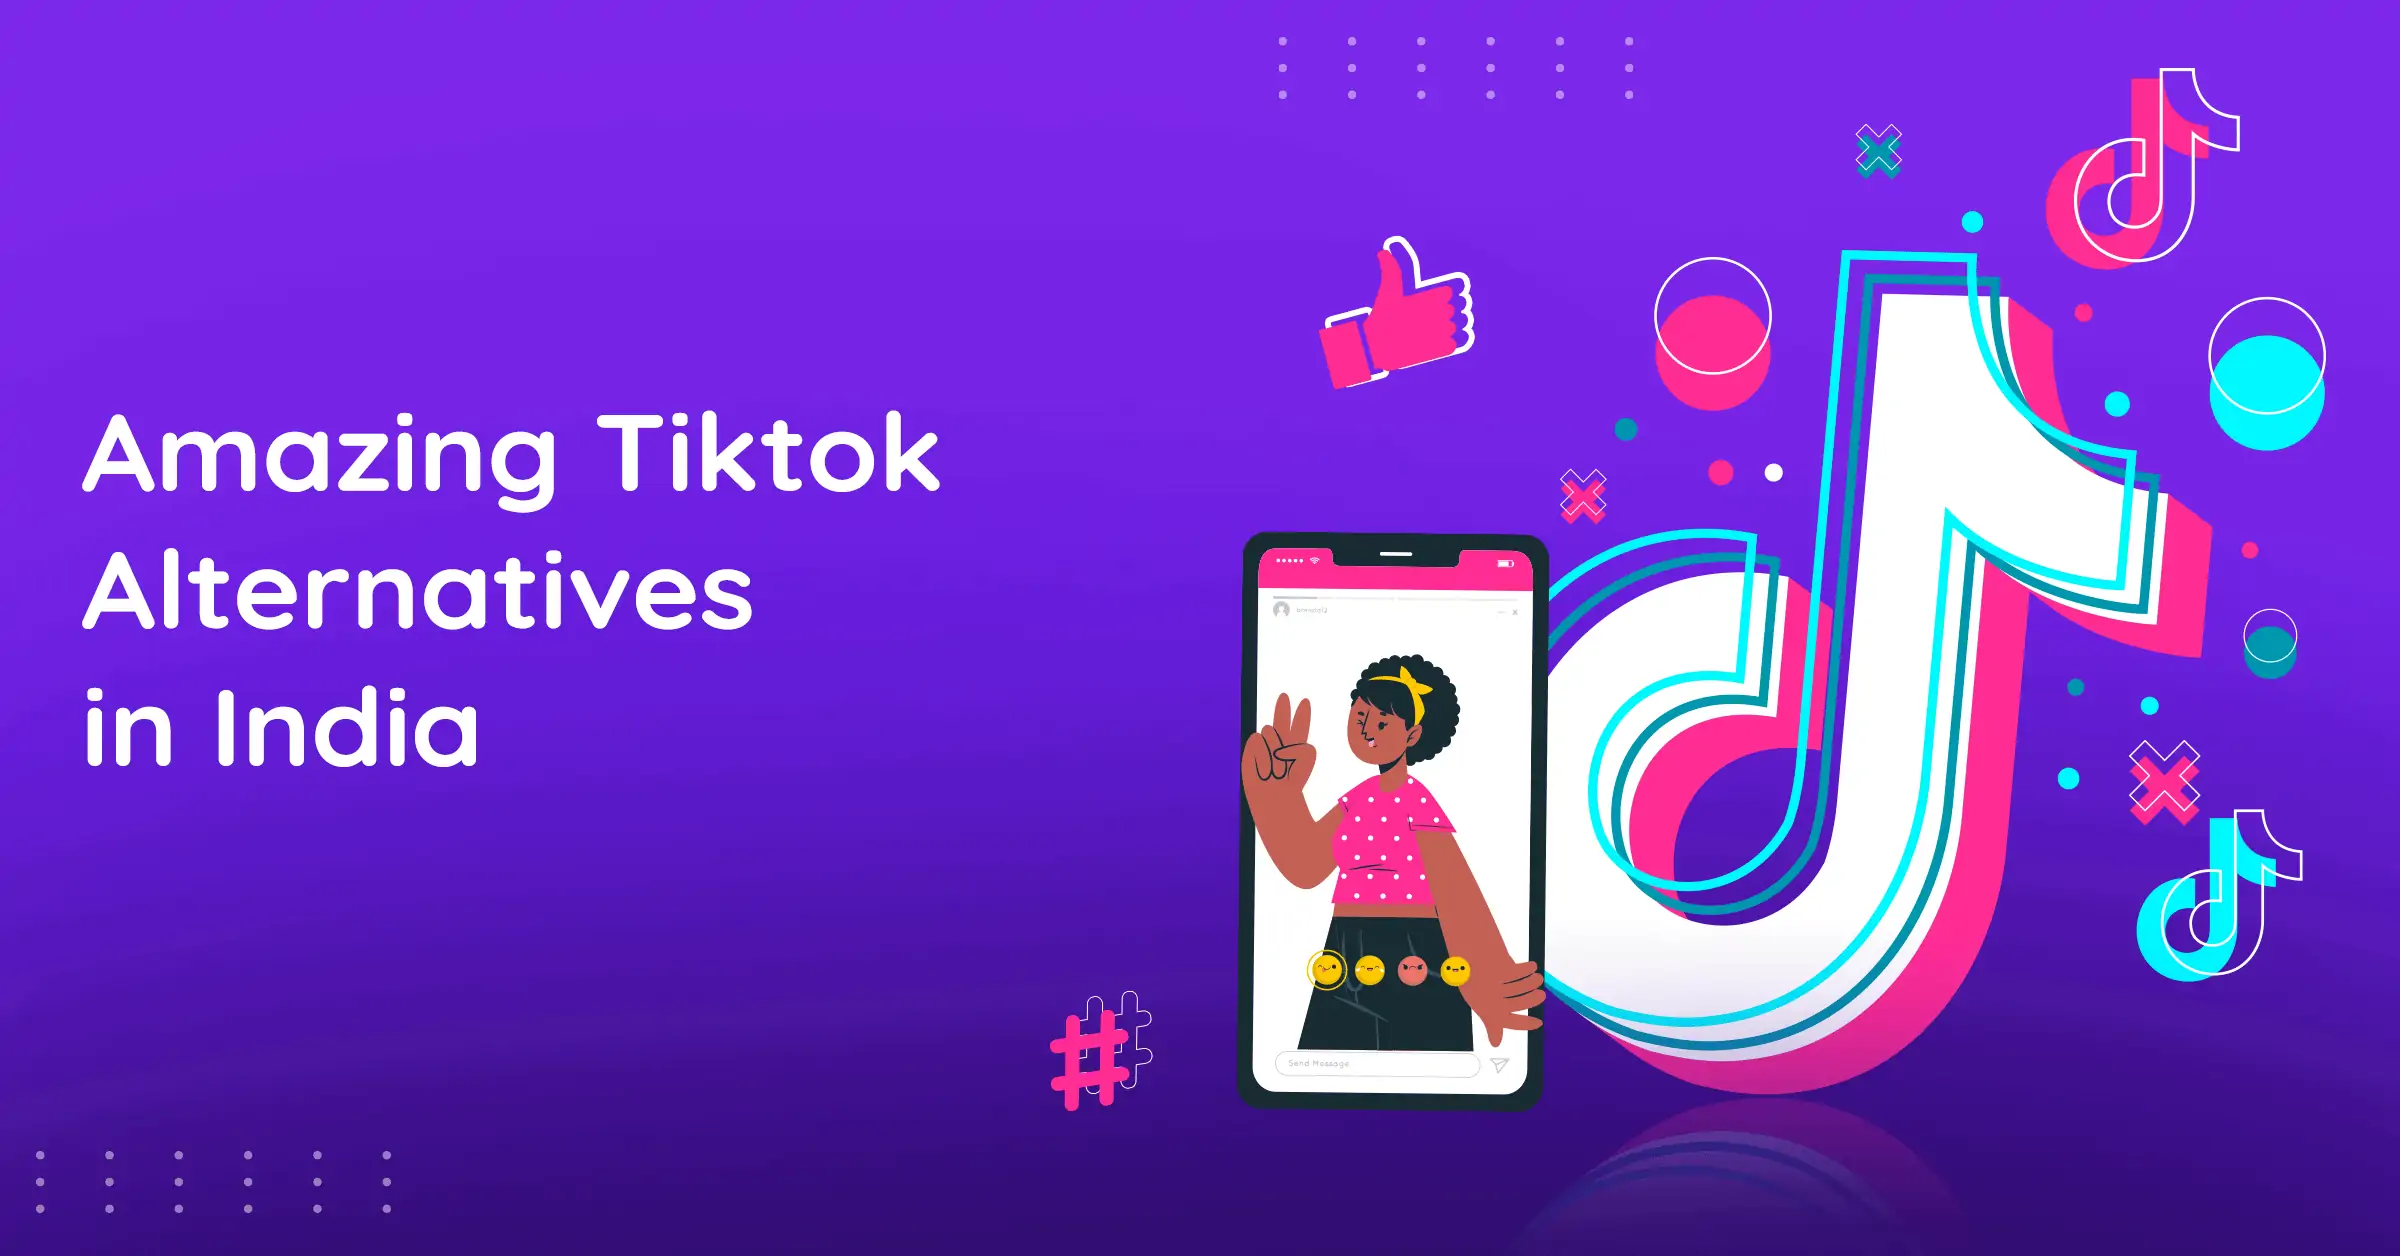 Music icon with a picture of a girl showing victory sign to display alternative tick-tock apps in India.